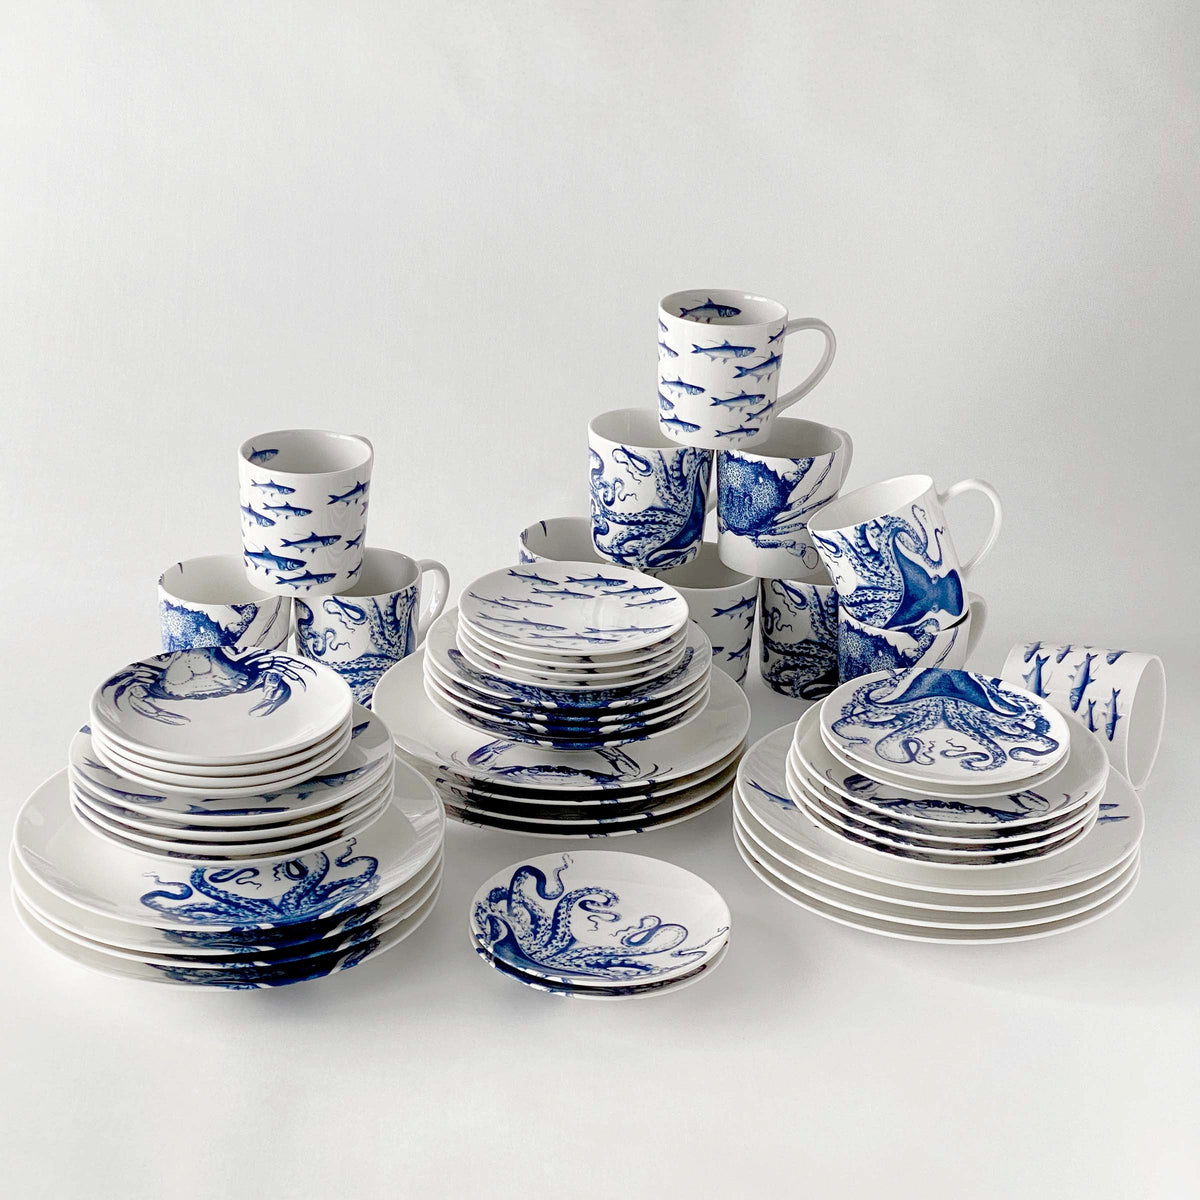 A set of Coastal Collection 48 Pc. Set dishes with intricate patterns on a white surface by Caskata Artisanal Home.